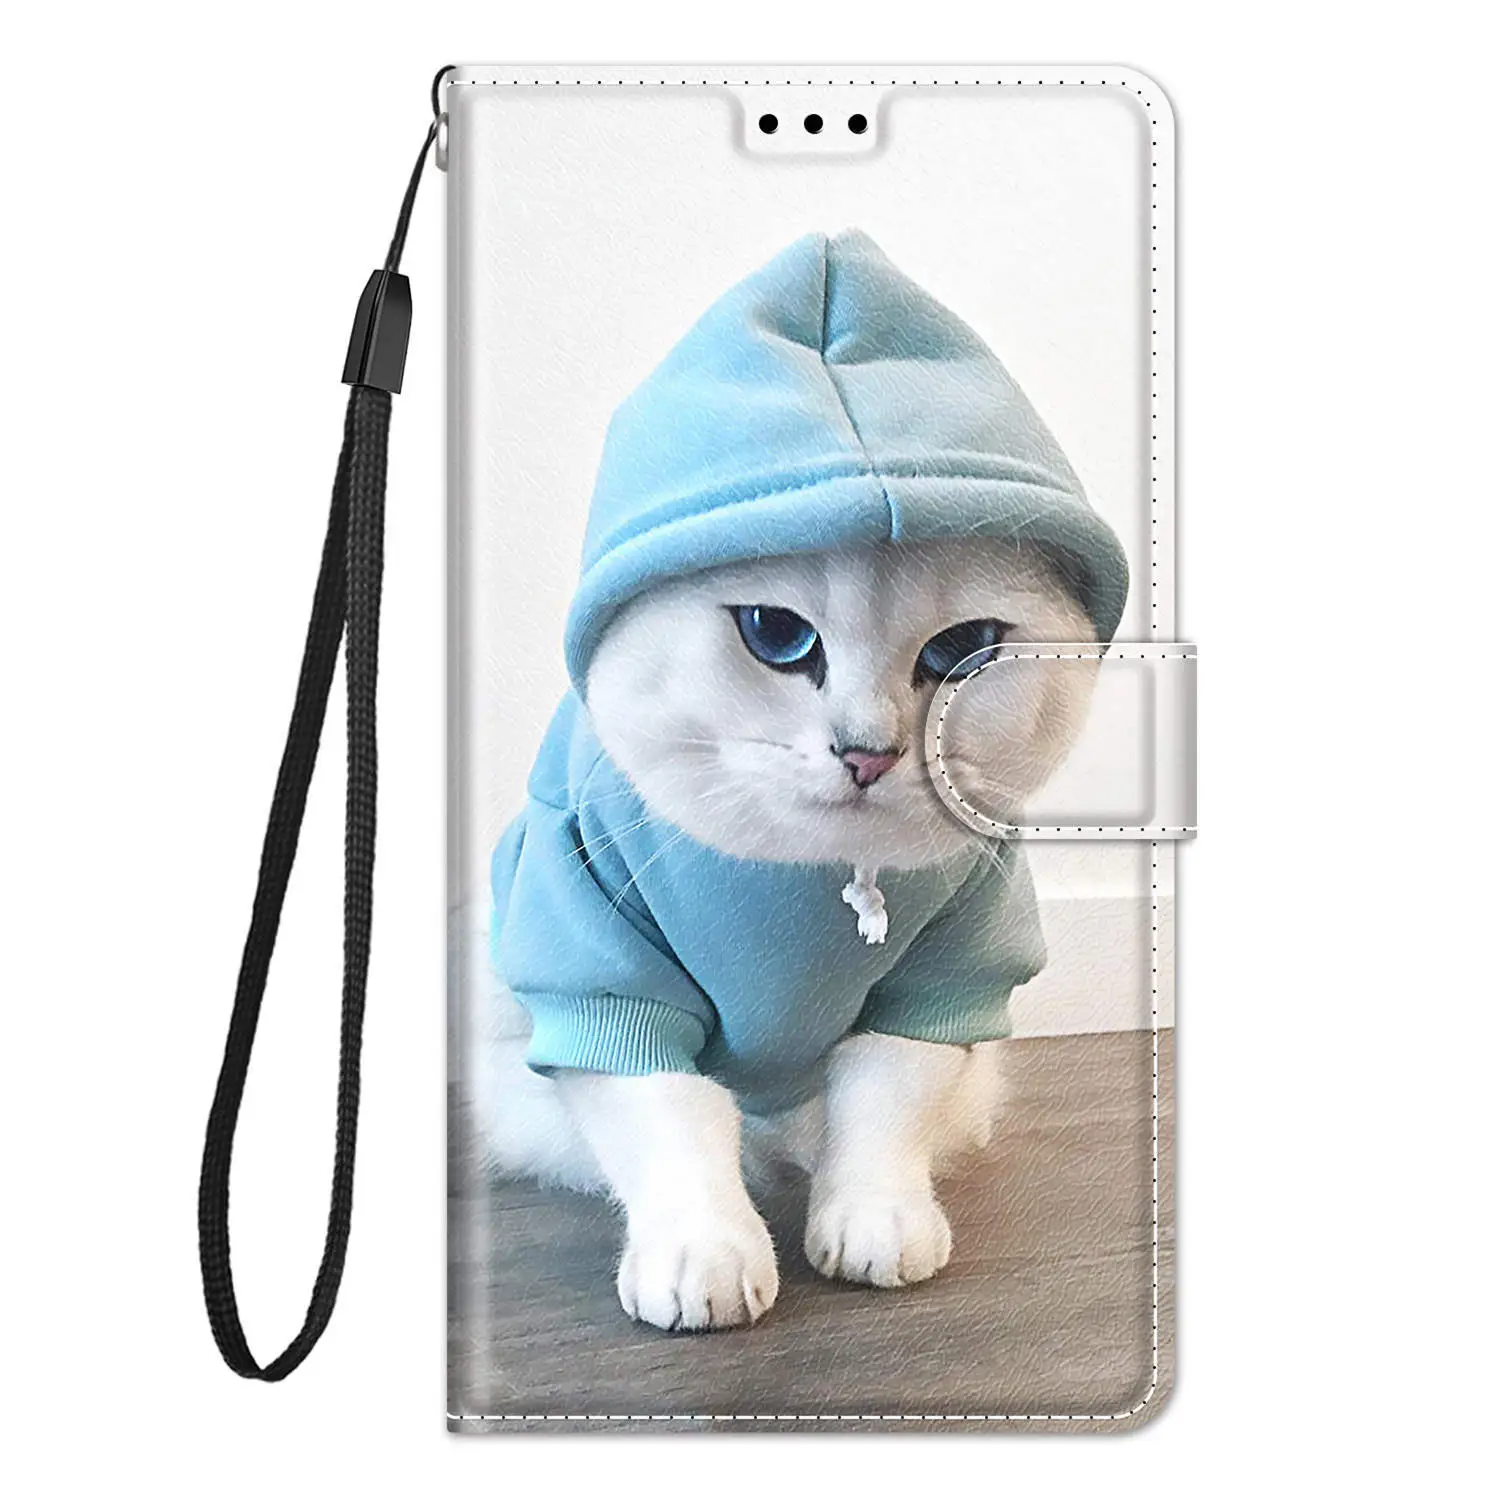 For Samsung Galaxy A21s Leather Flip Case A10 A20 A20E A30 A30S A40 A50 A50S A70 A12 A11 A51 A71 Luxury Phone Wallet Cover Etui kawaii phone cases samsung Cases For Samsung